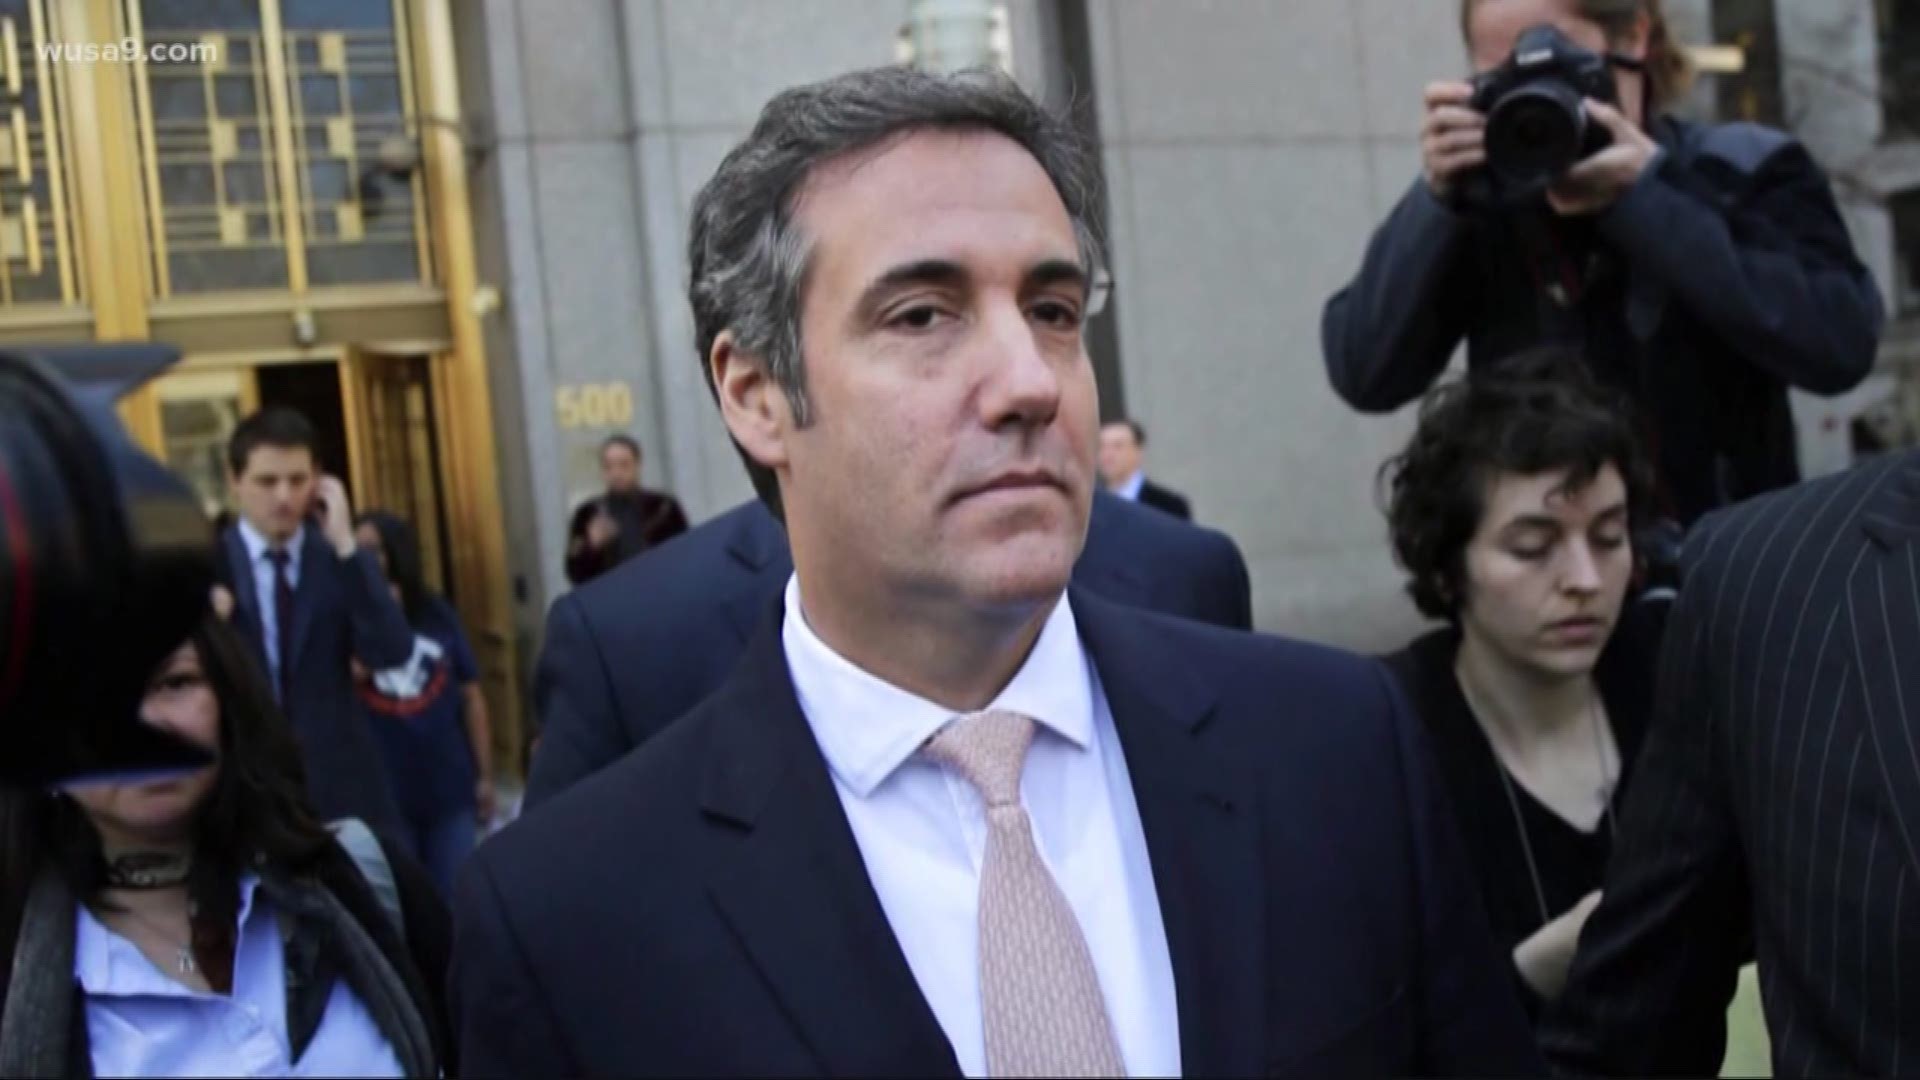 President Trump's former personal attorney Michael Cohen heads to jail. He'll begin serving a 3 year sentence for campaign finance violations, tax evasion, bank fraud and lying to Congress.